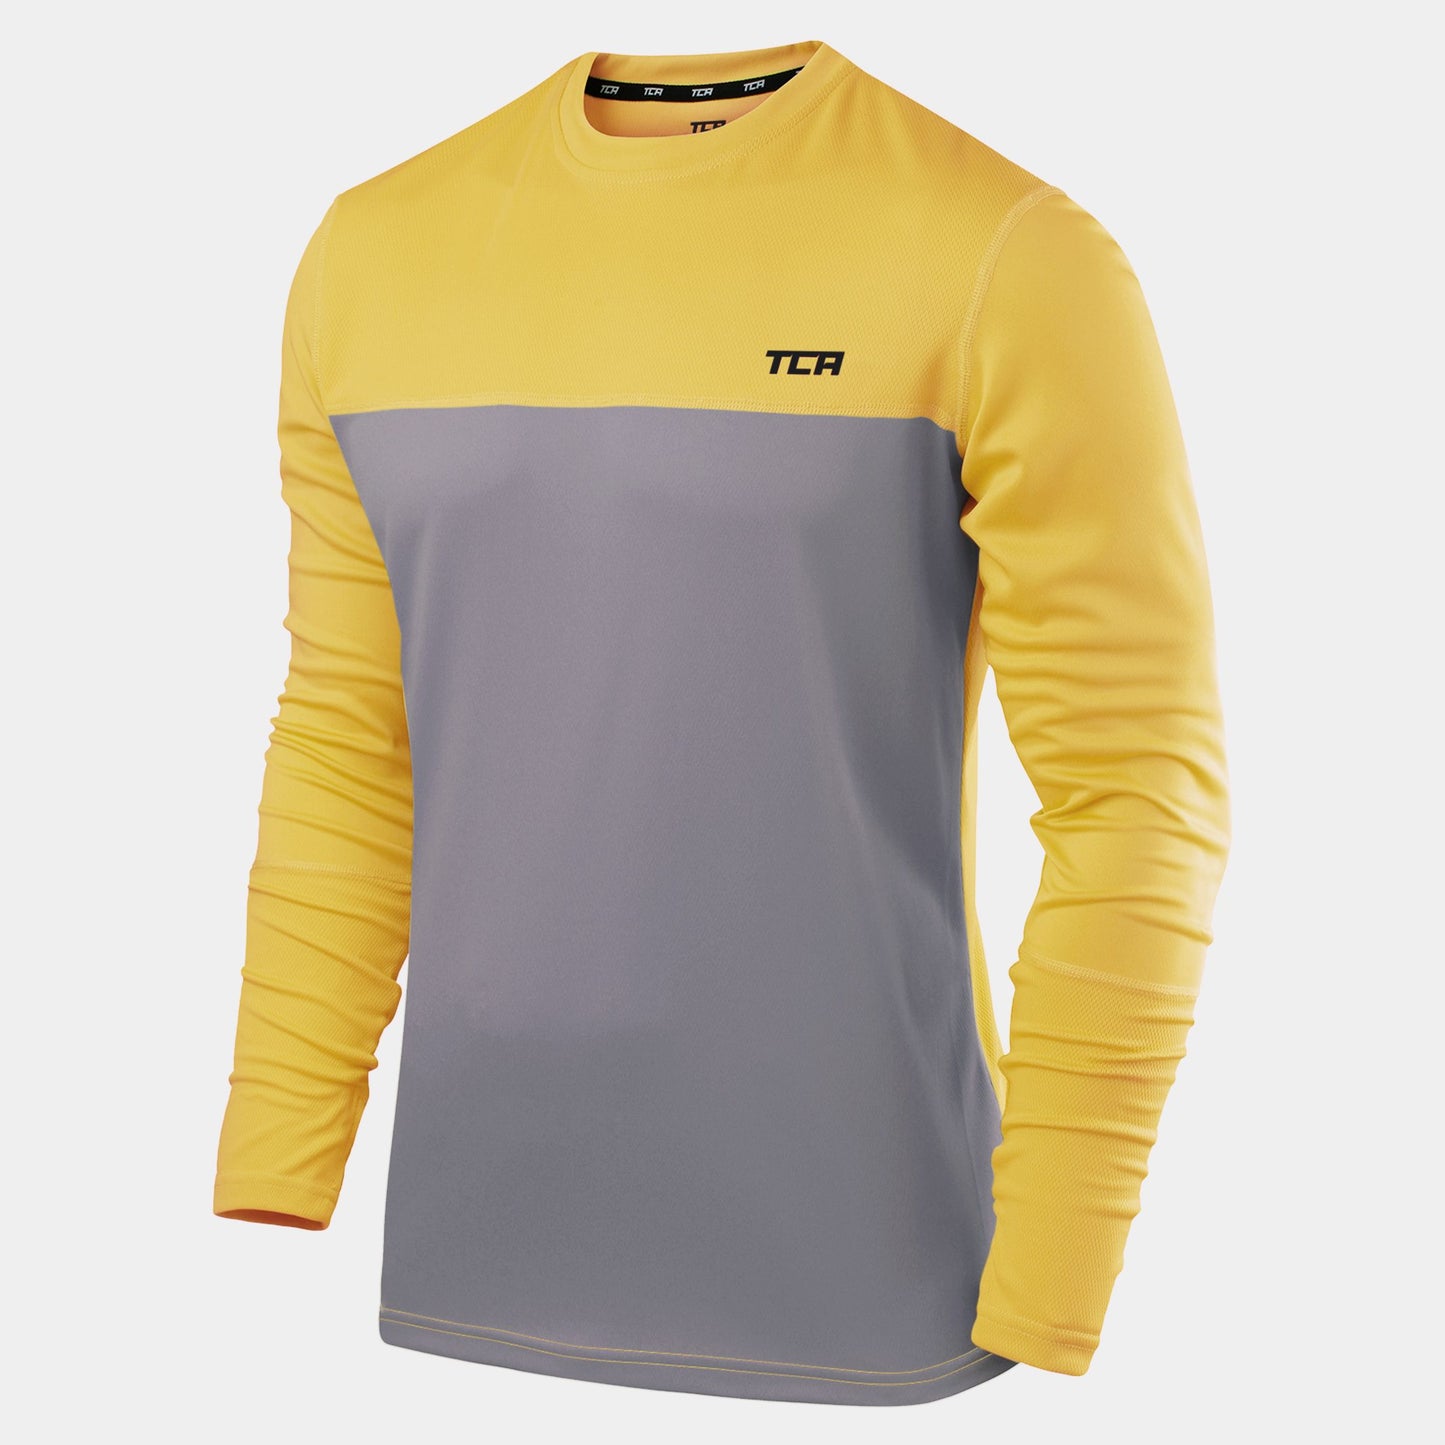 Stamina Long Sleeve Crew Neck Running Top For Men With Thumbholes